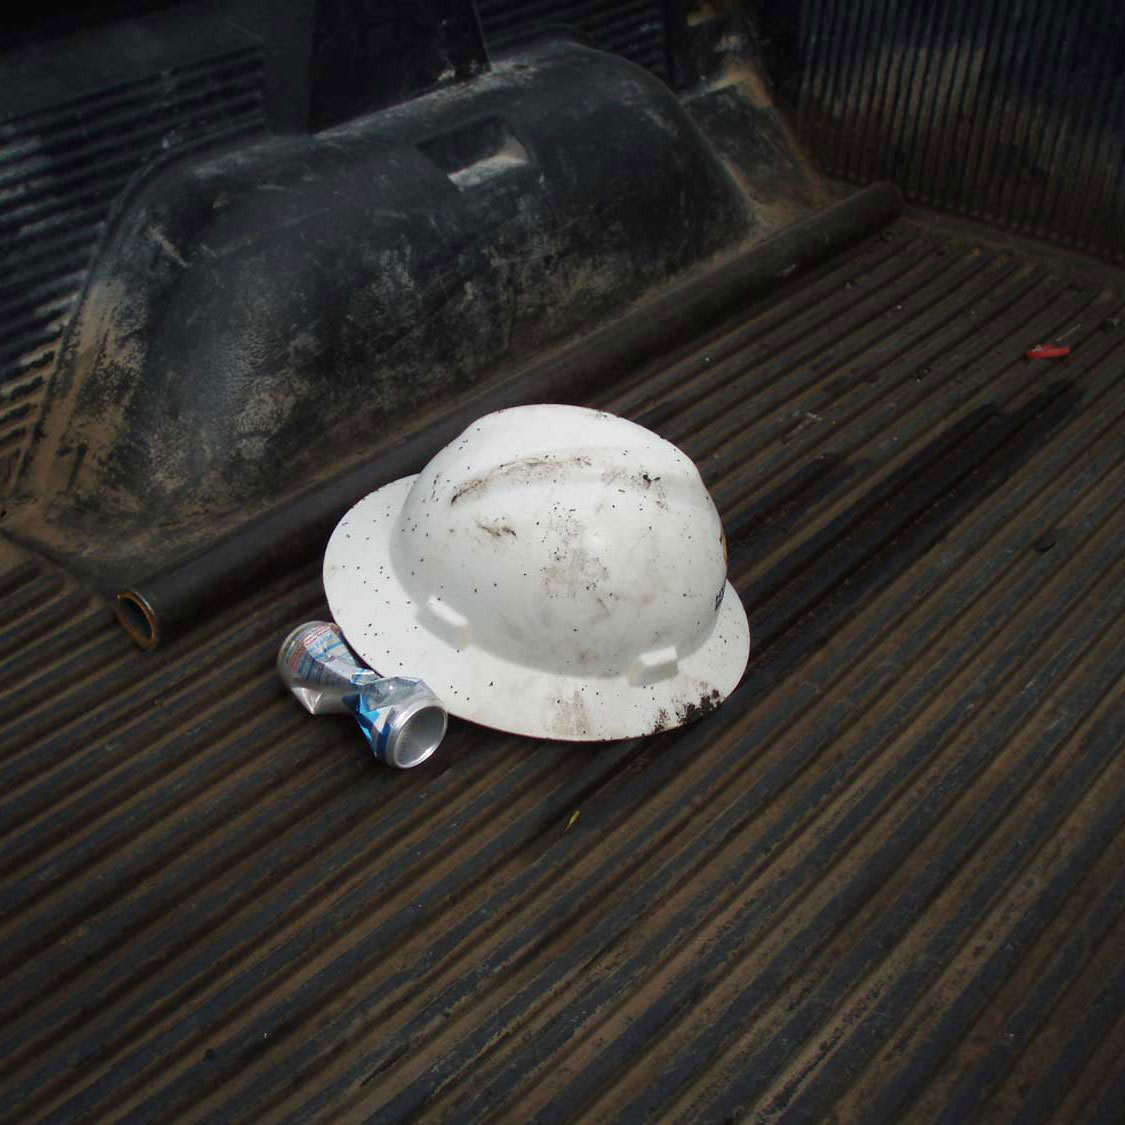 Hard hat in truck bed